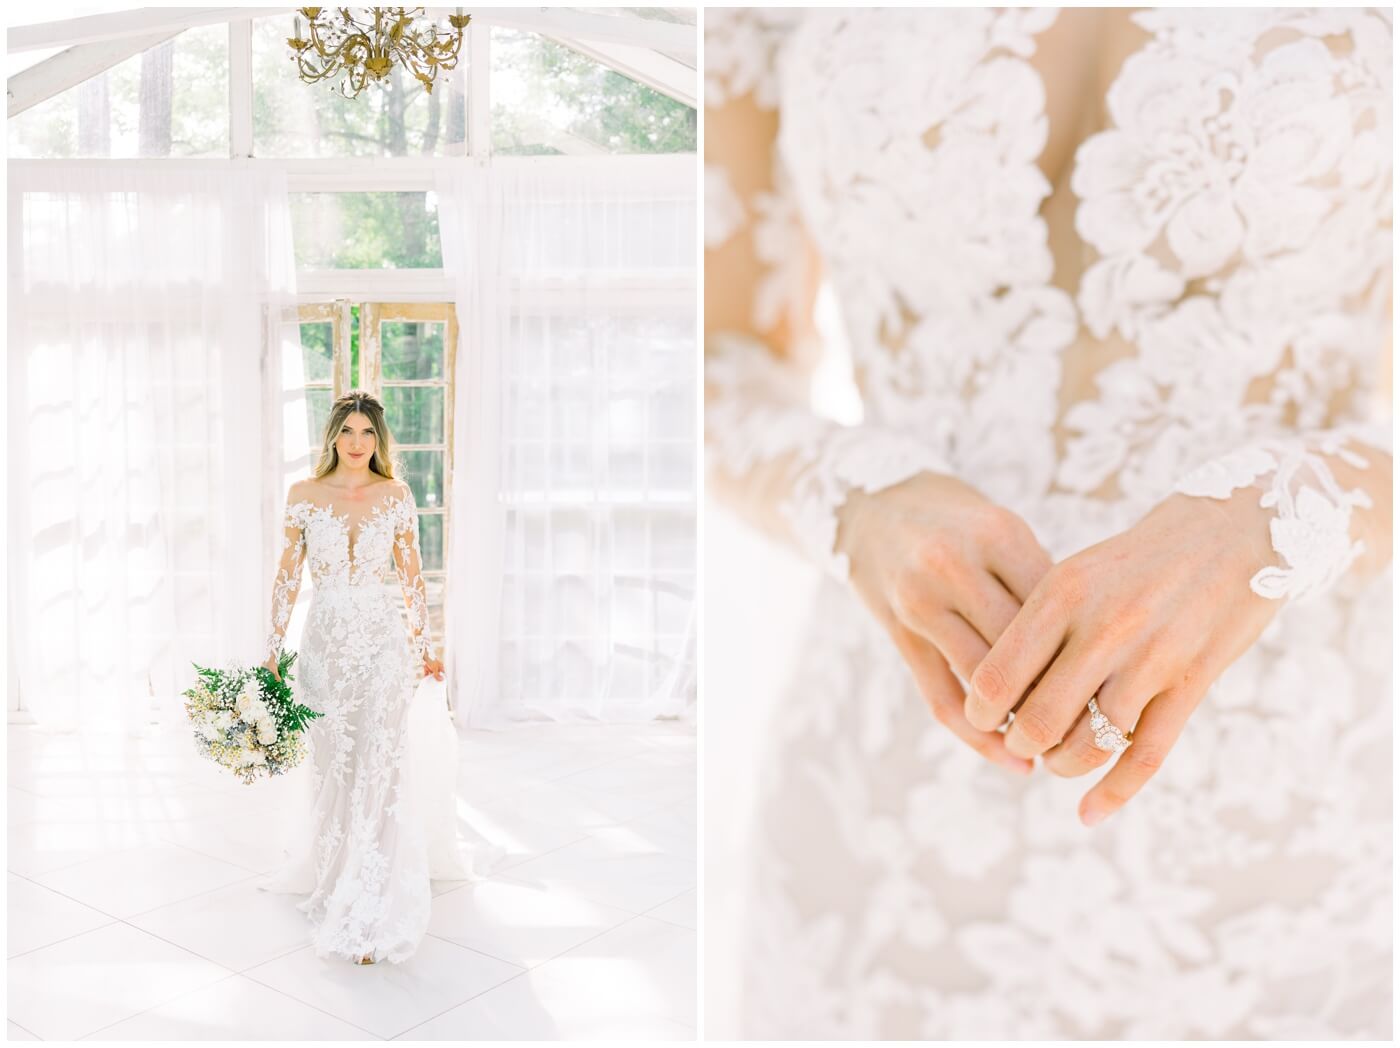 A bride shows the beautiful lace design on her wedding dress